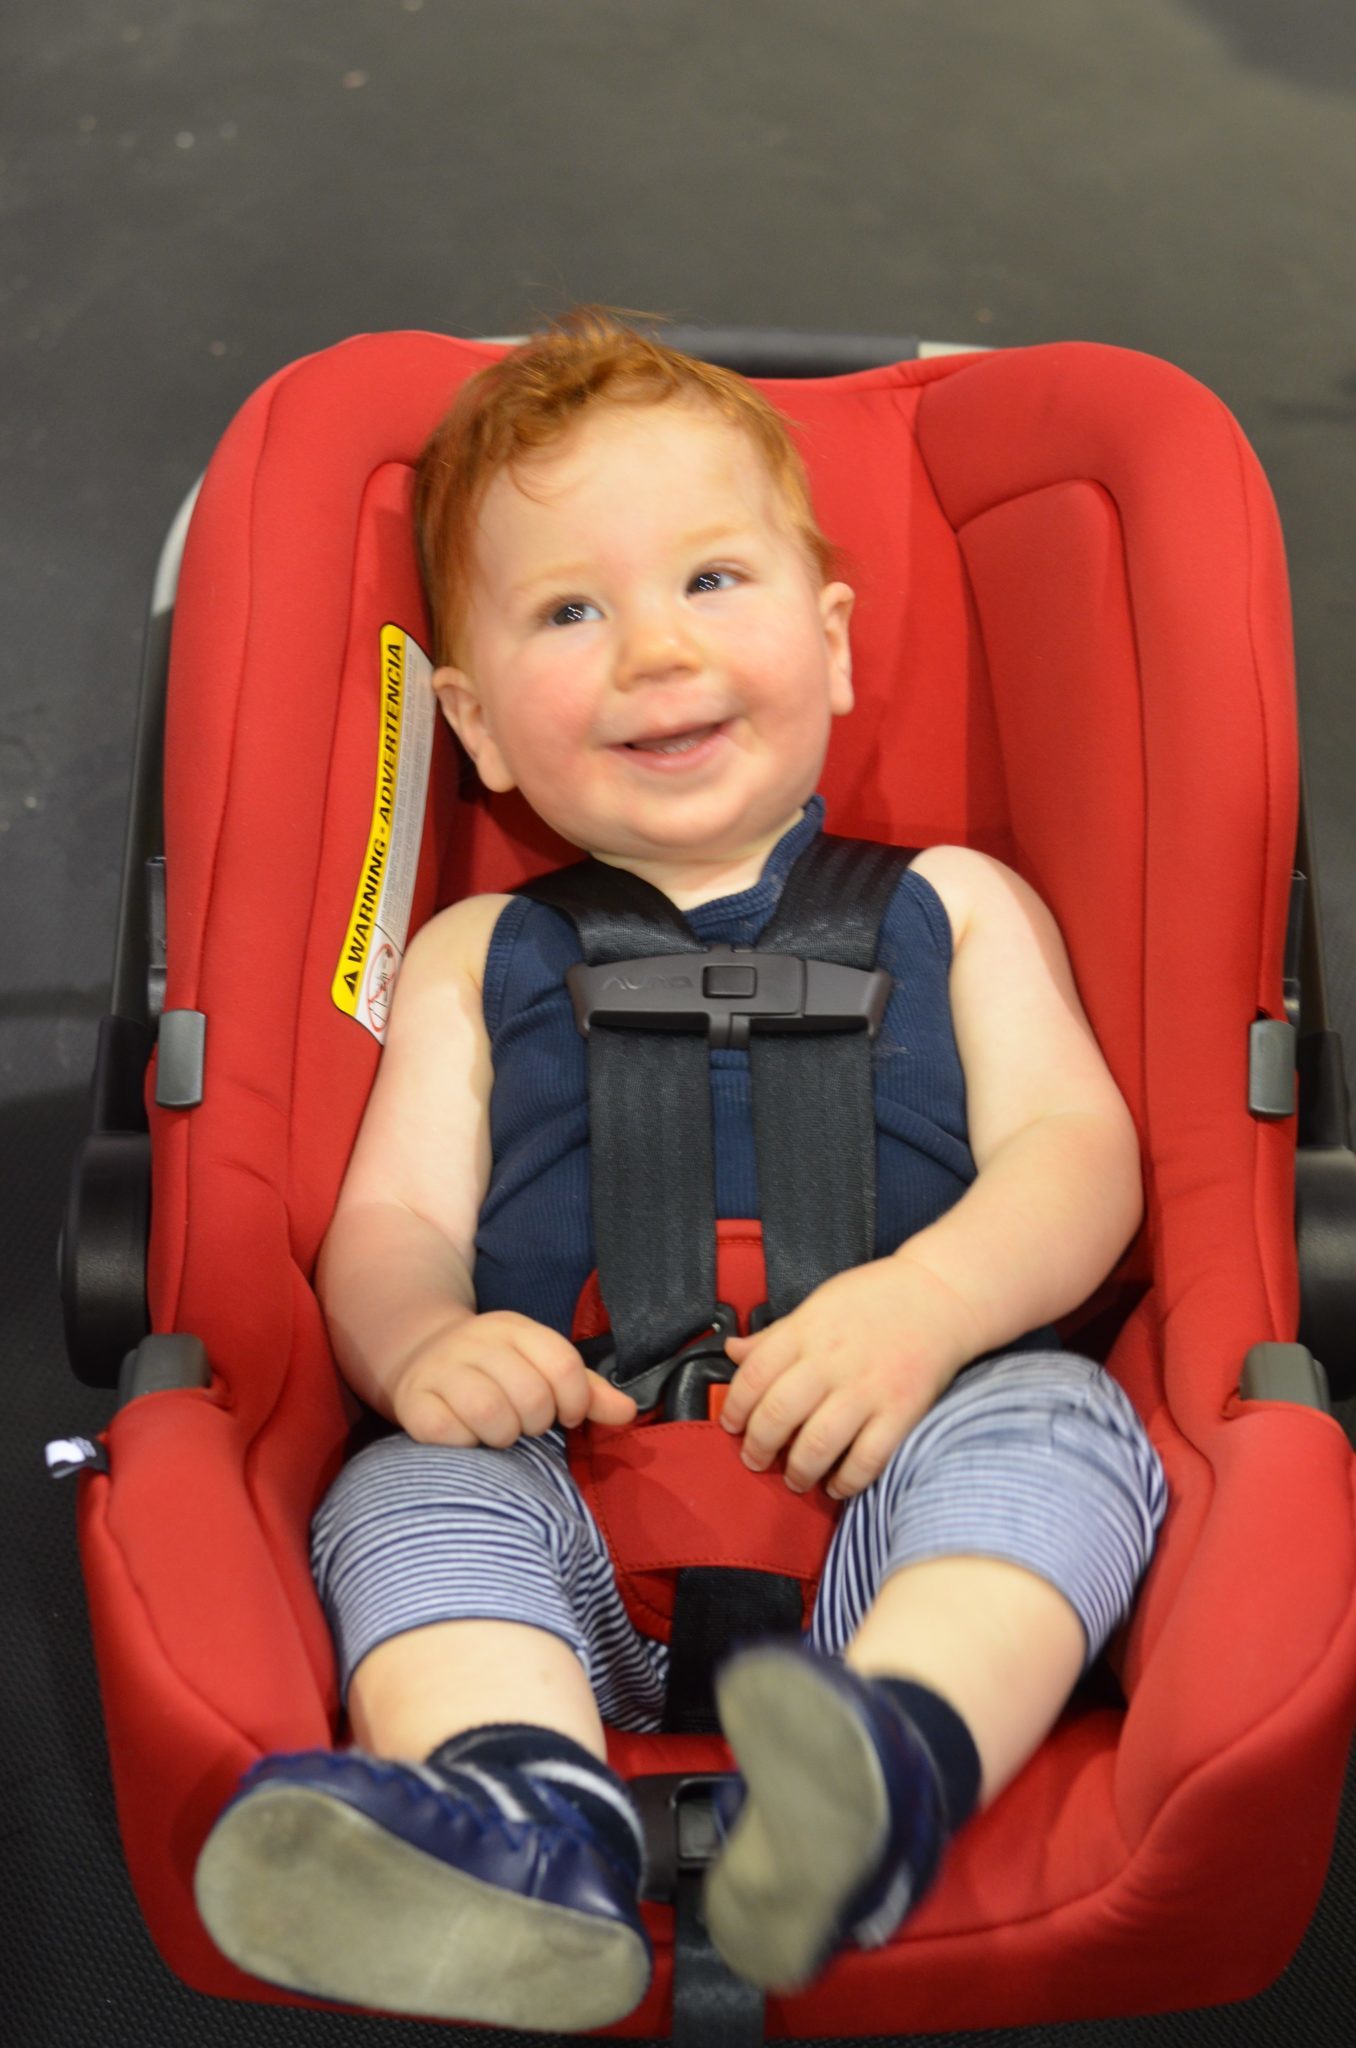 Car Seat Ladyheight And Weight Limits, What Is The Weight Limit For A Child To Be Out Of Car Seat